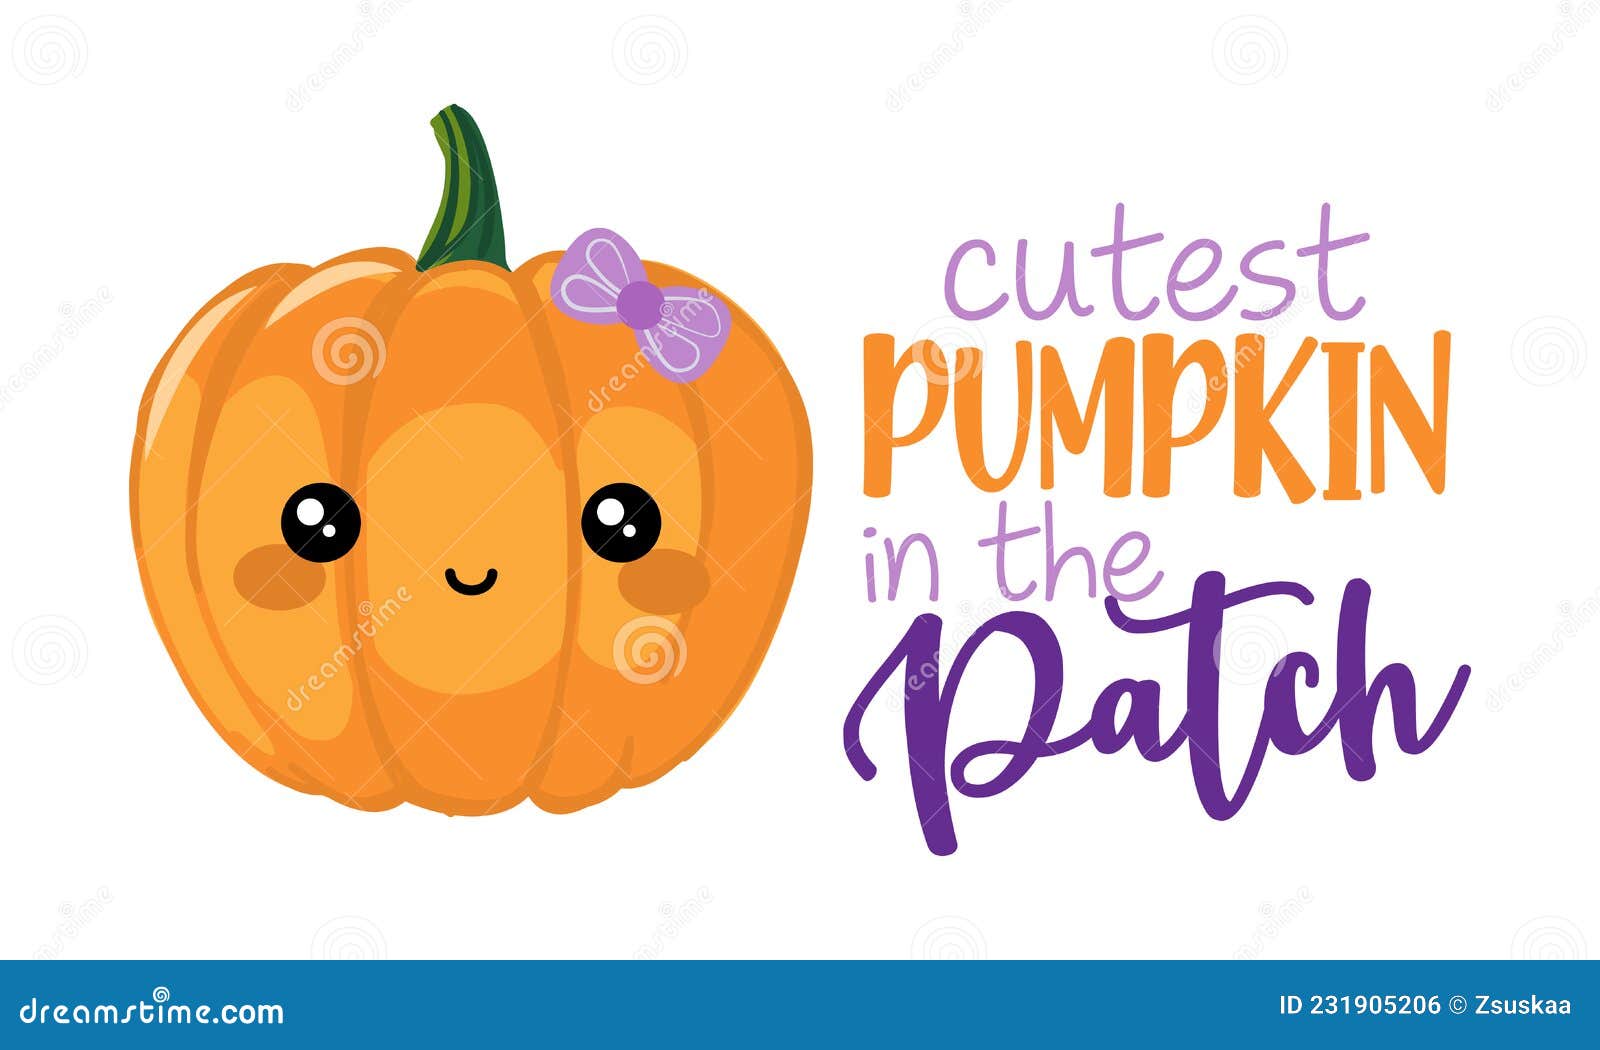 cutest pumpkin in the patch - hand drawn pretty  pumpkin girl with quote.